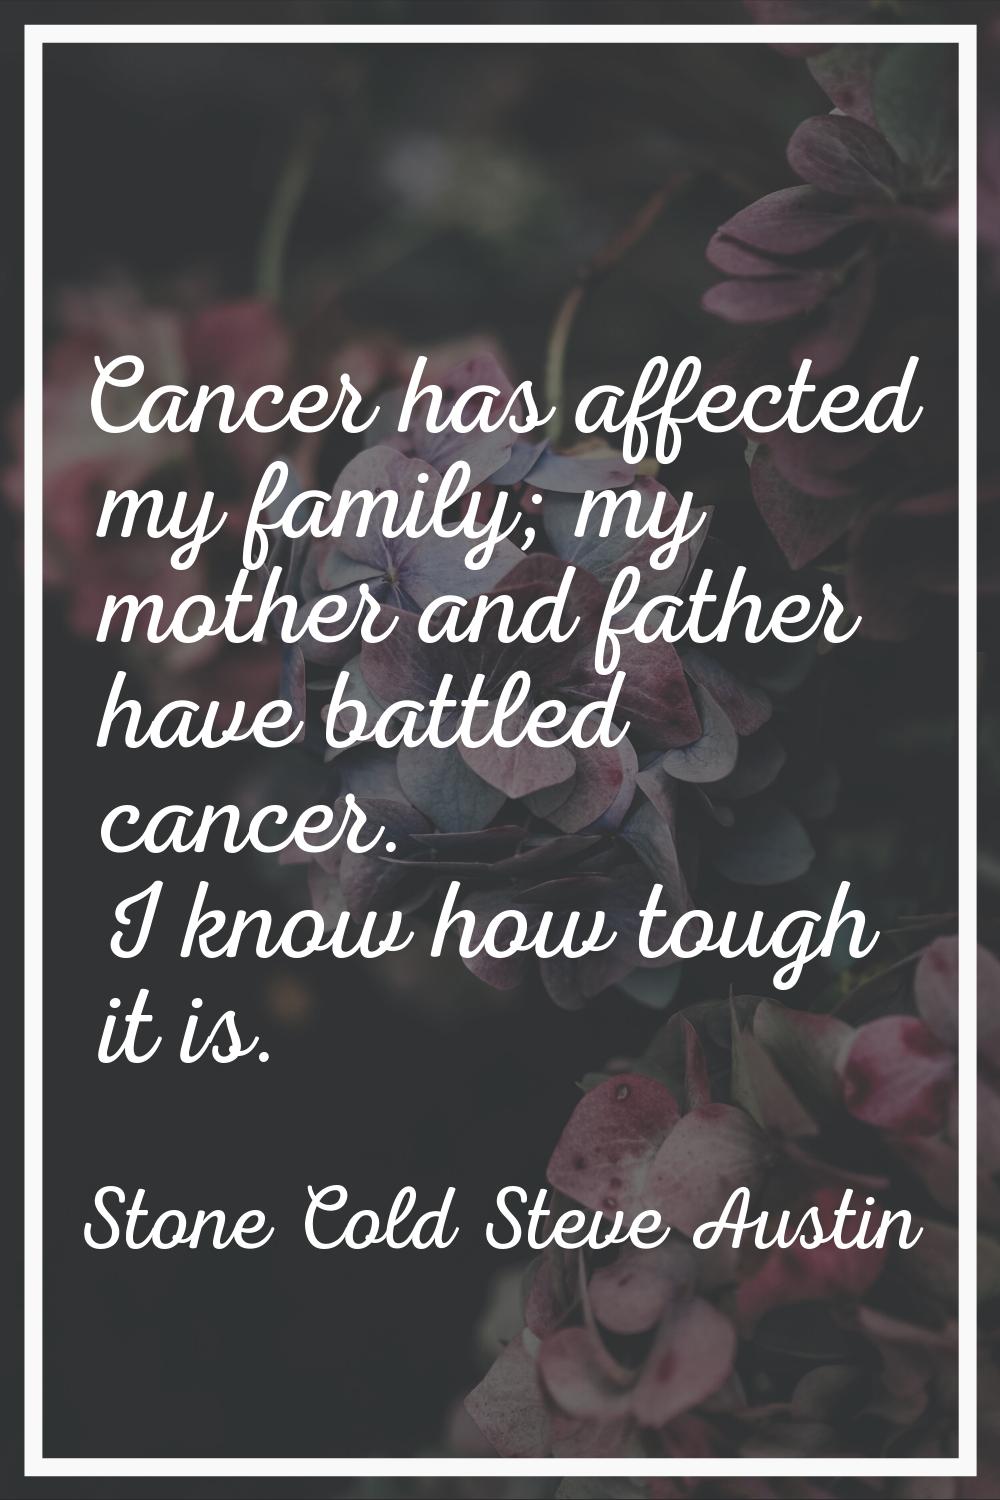 Cancer has affected my family; my mother and father have battled cancer. I know how tough it is.